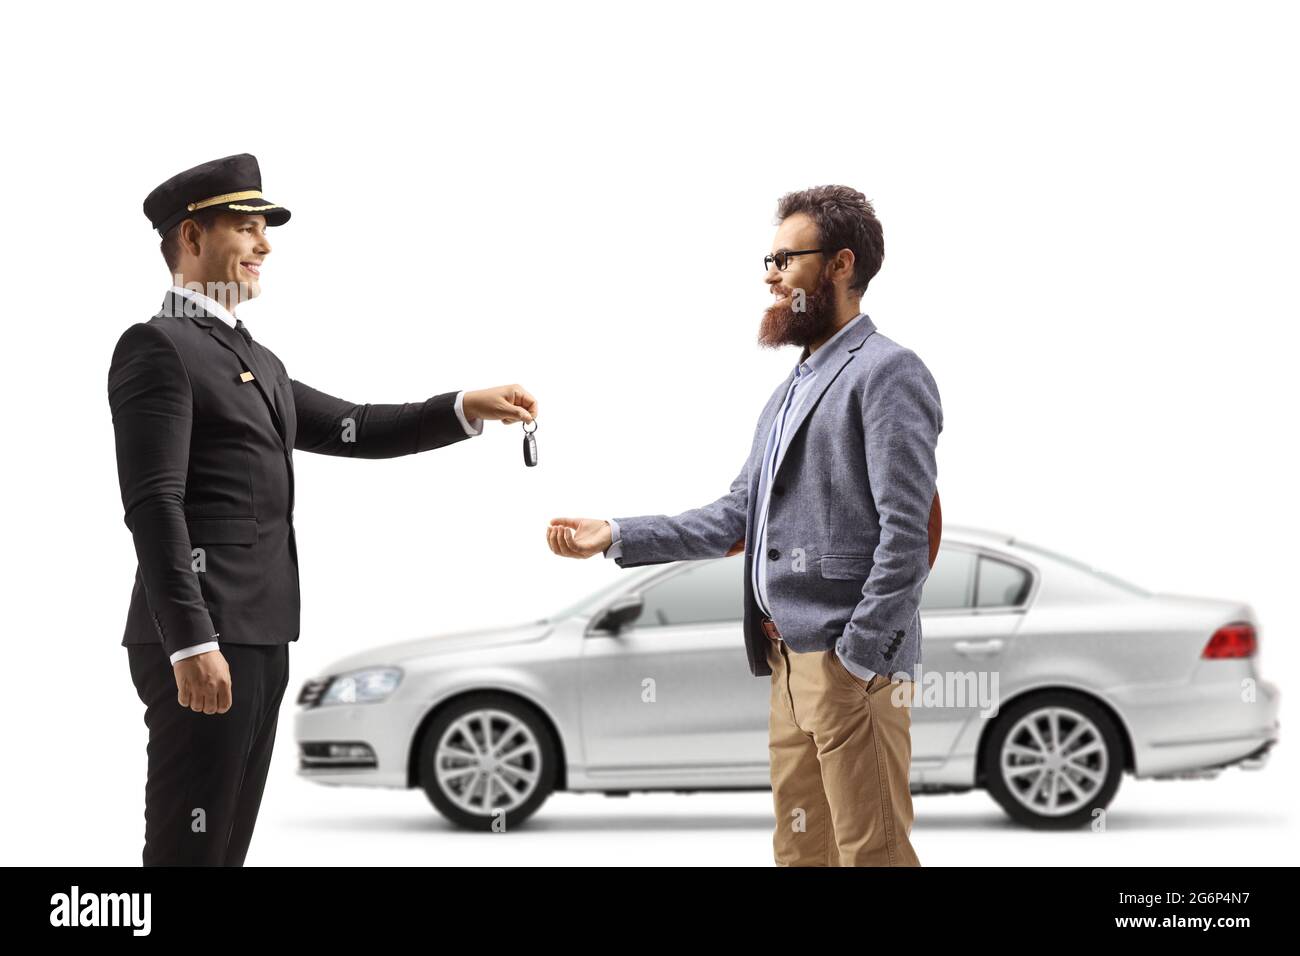 Chauffeur giving car keys from a silver car to a bearded man isolated on white background Stock Photo